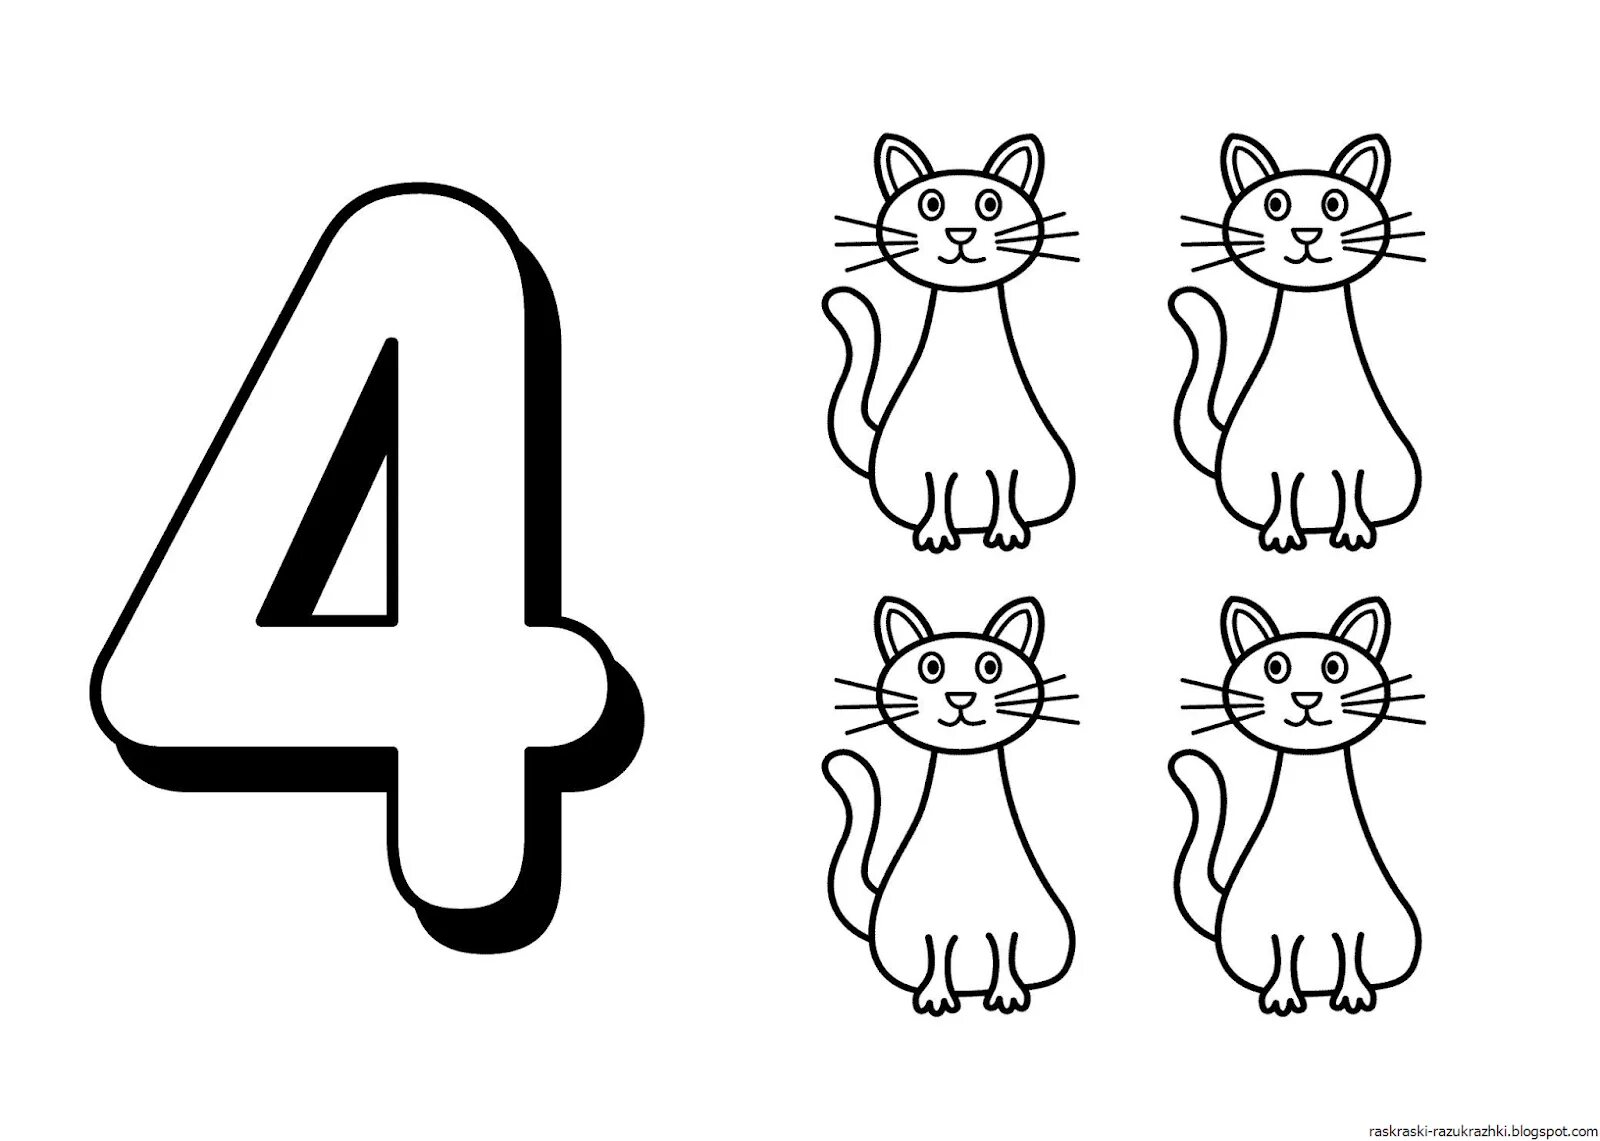 Numbers for 3 year olds #14